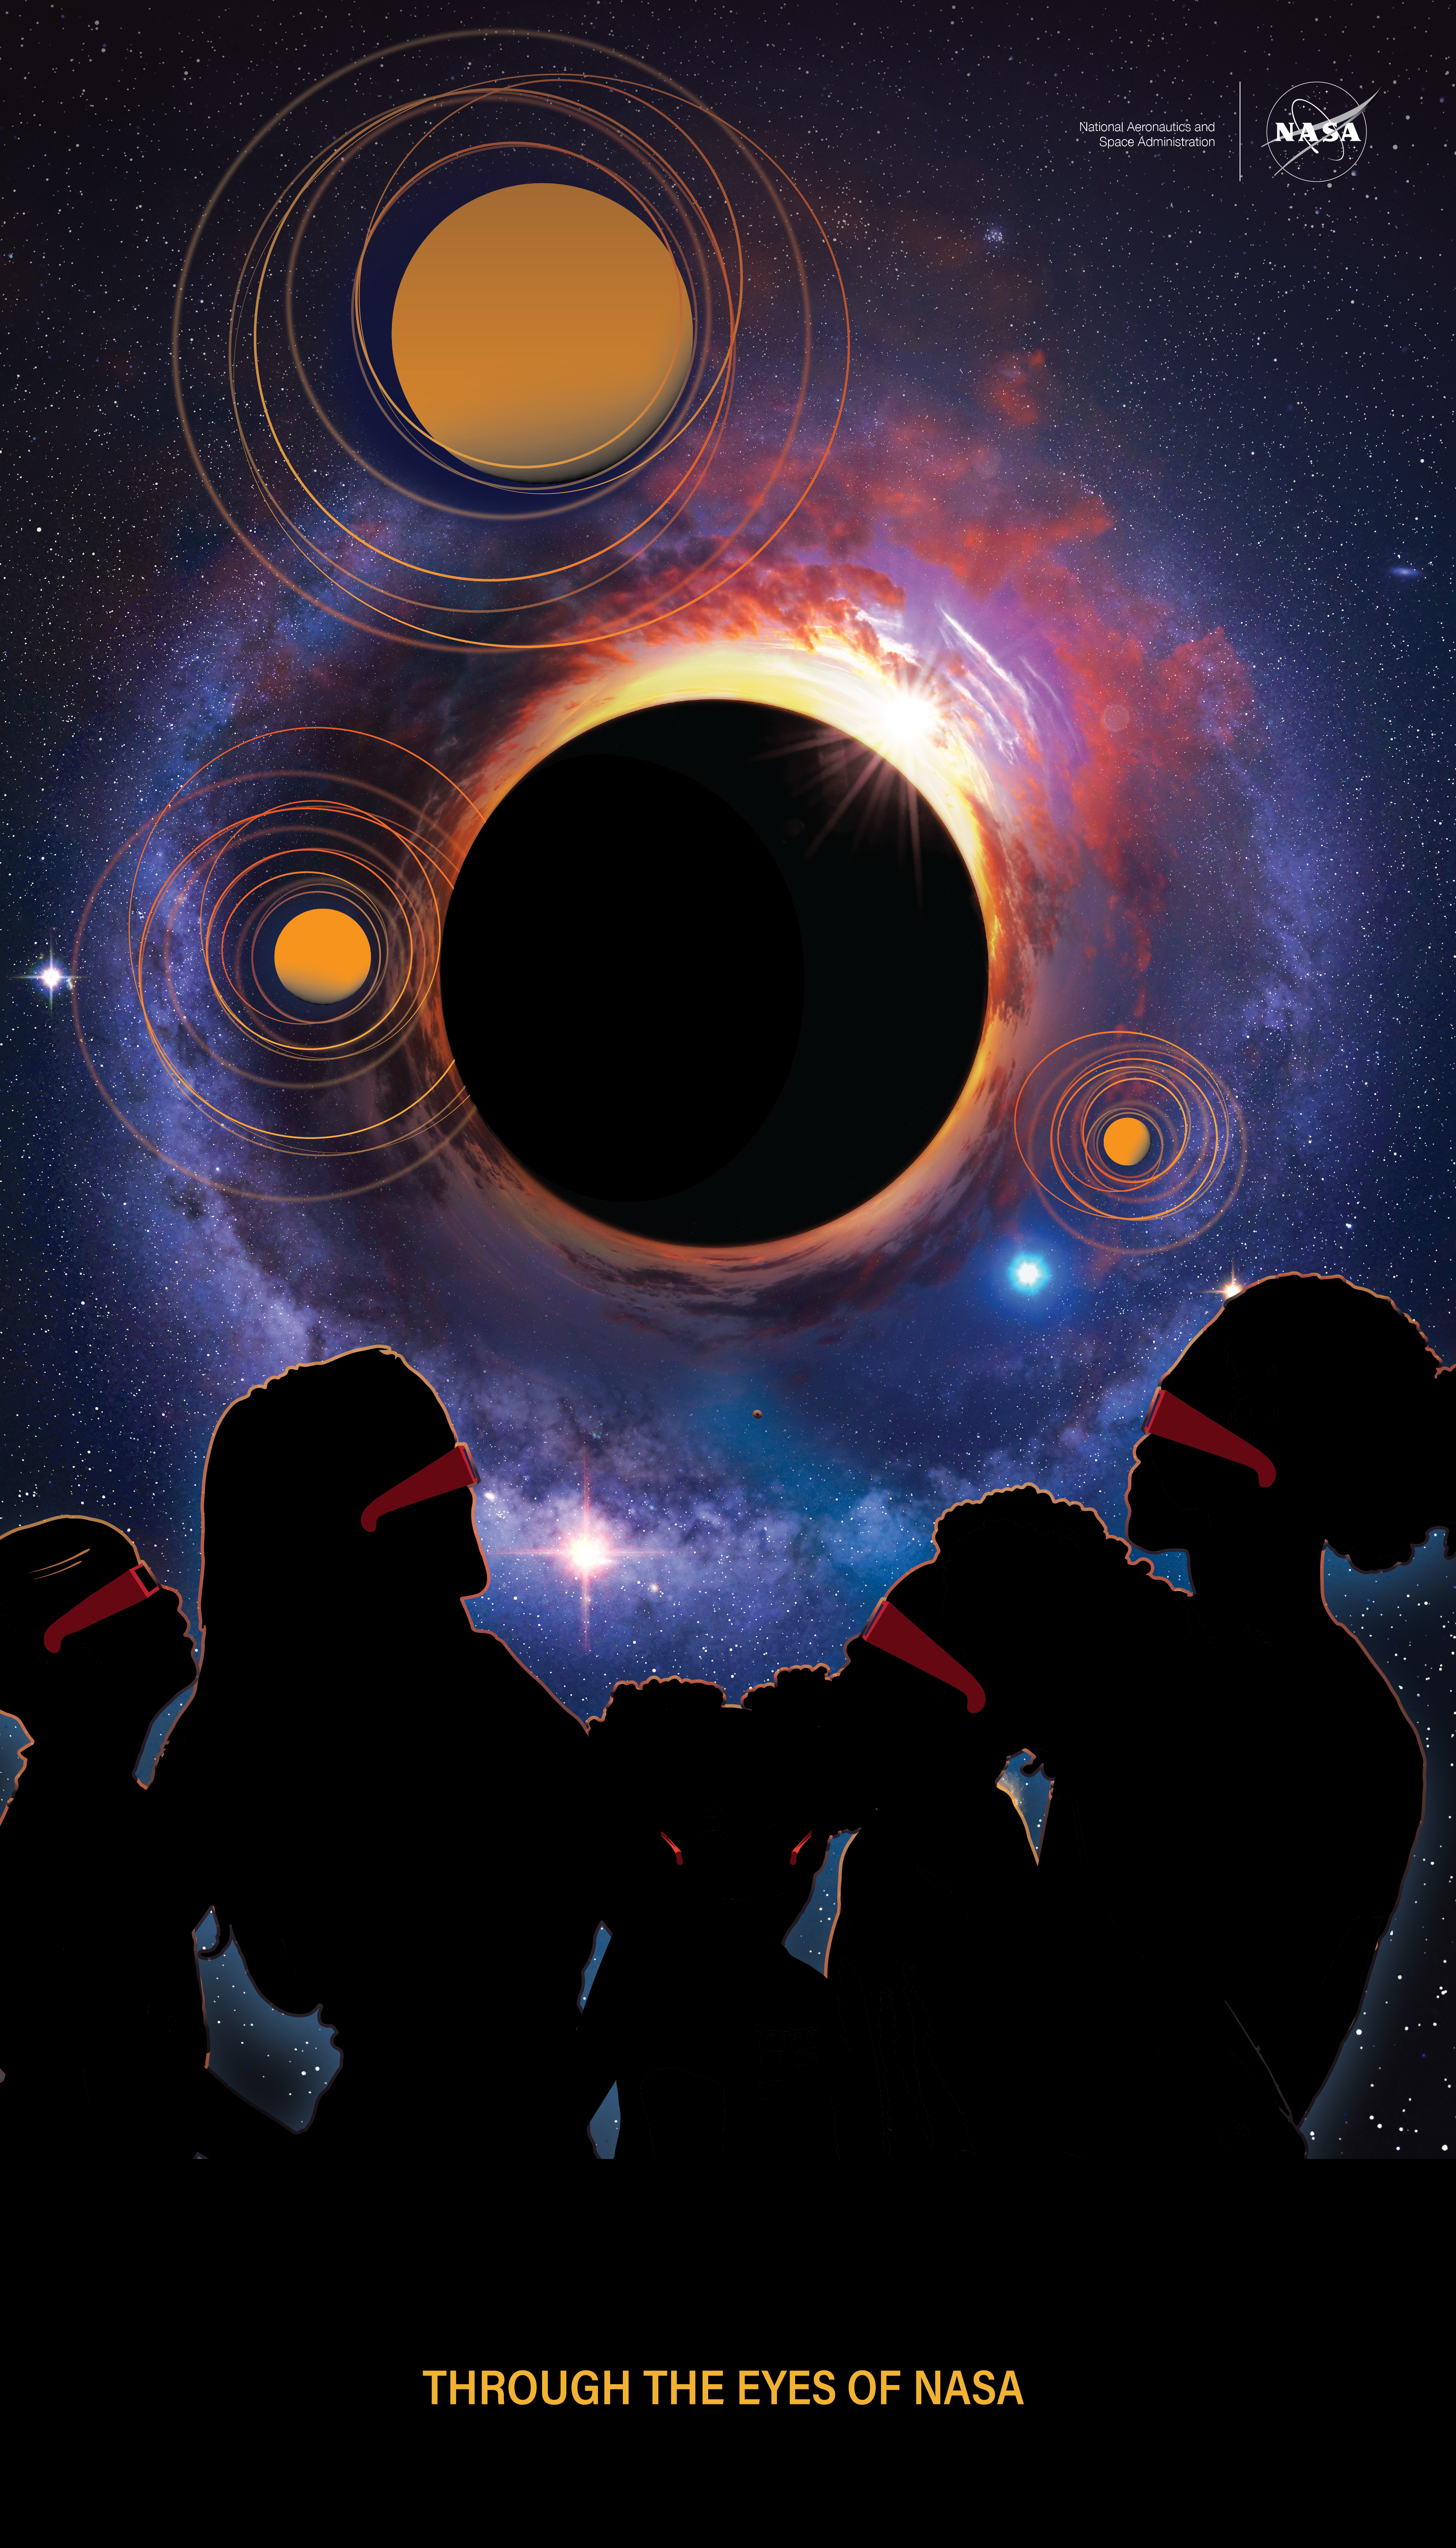 A black starry sky fills the edges of the poster. Closer toward the middle of the posters is a blue area resembling a cloudy galaxy. In the middle, a large black circle covers most of a bright yellow Sun – an eclipse. On the top right of the circle, some of the Sun peeks out. Three golden, solid circles, surrounded by thin orange circular lines are scattered around the middle eclipse. At the bottom of the poster, 5 people, varying in age, wear eclipse glasses and look up toward the eclipse.